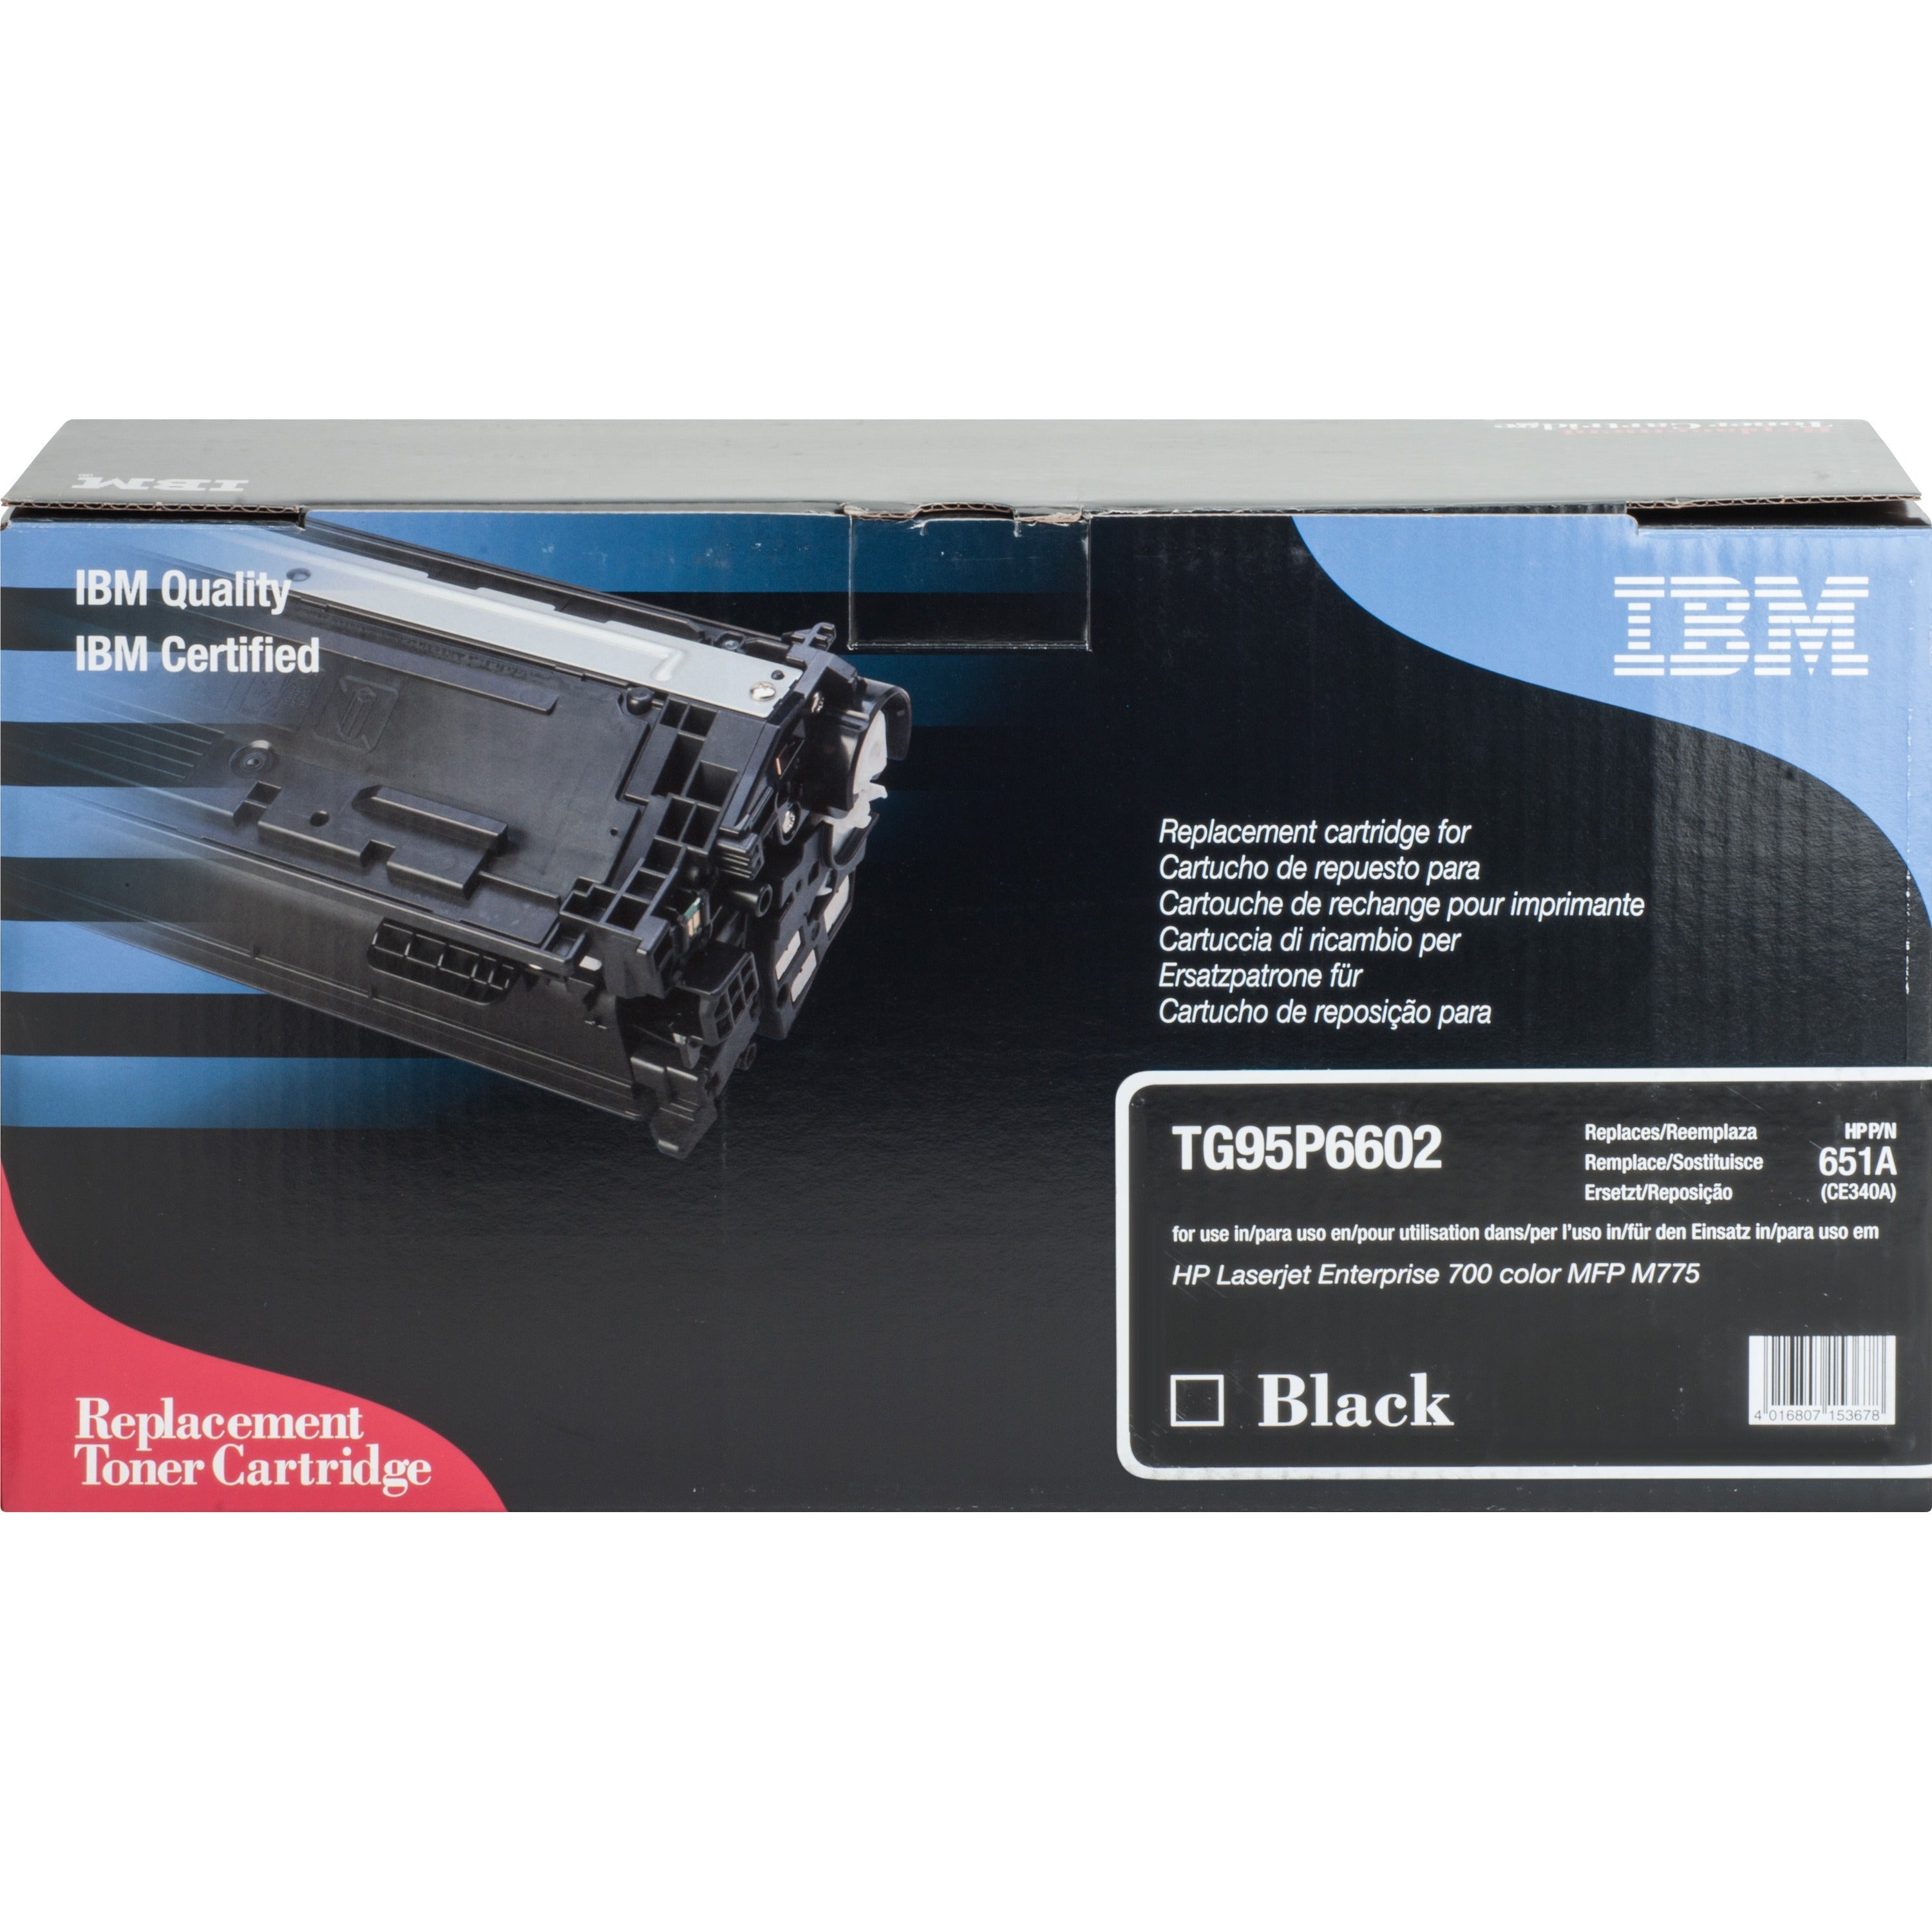 ibm-remanufactured-laser-toner-cartridge-alternative-for-hp-507a-ce340a-ce400a-black-1-each-13500-pages_ibmtg95p6602 - 1